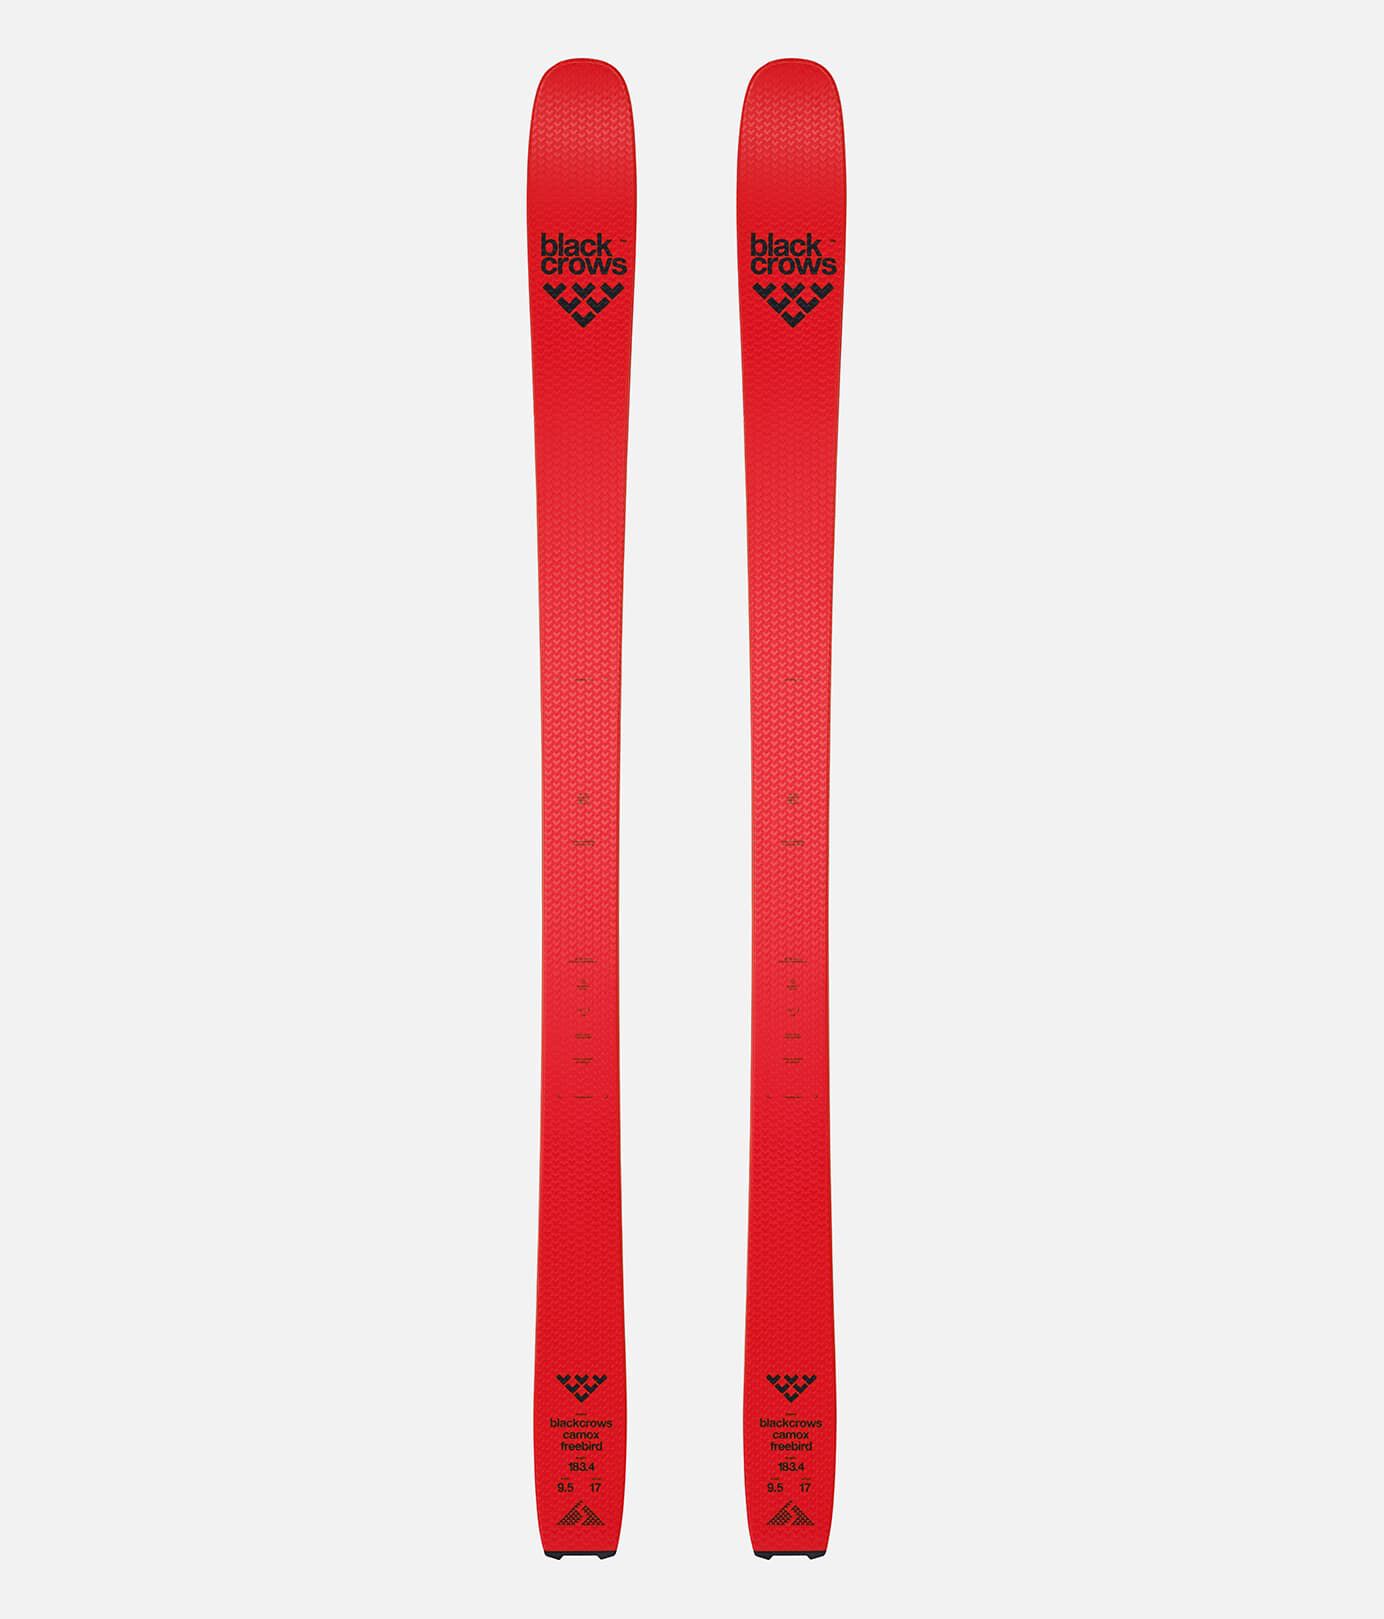 blackcrows | mens collection | Black Crows Skis